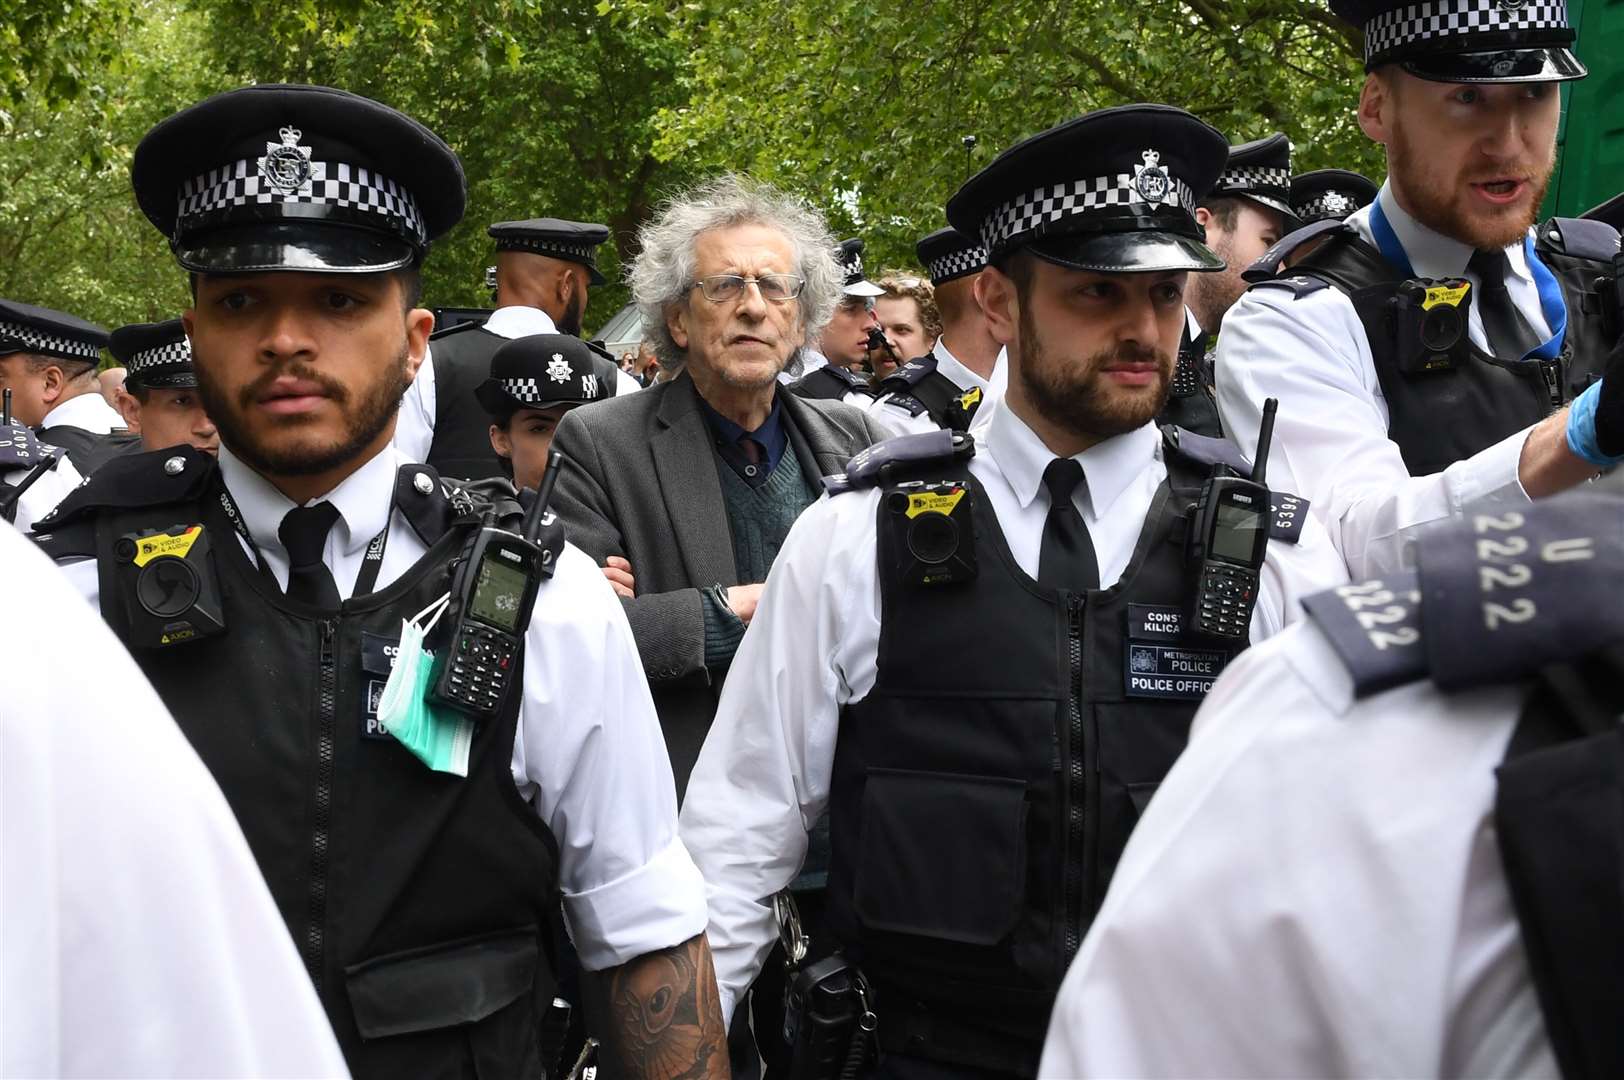 Police lead away Piers Corbyn during a protest in Hyde Park, London, in May (Stefan Rousseau/PA)